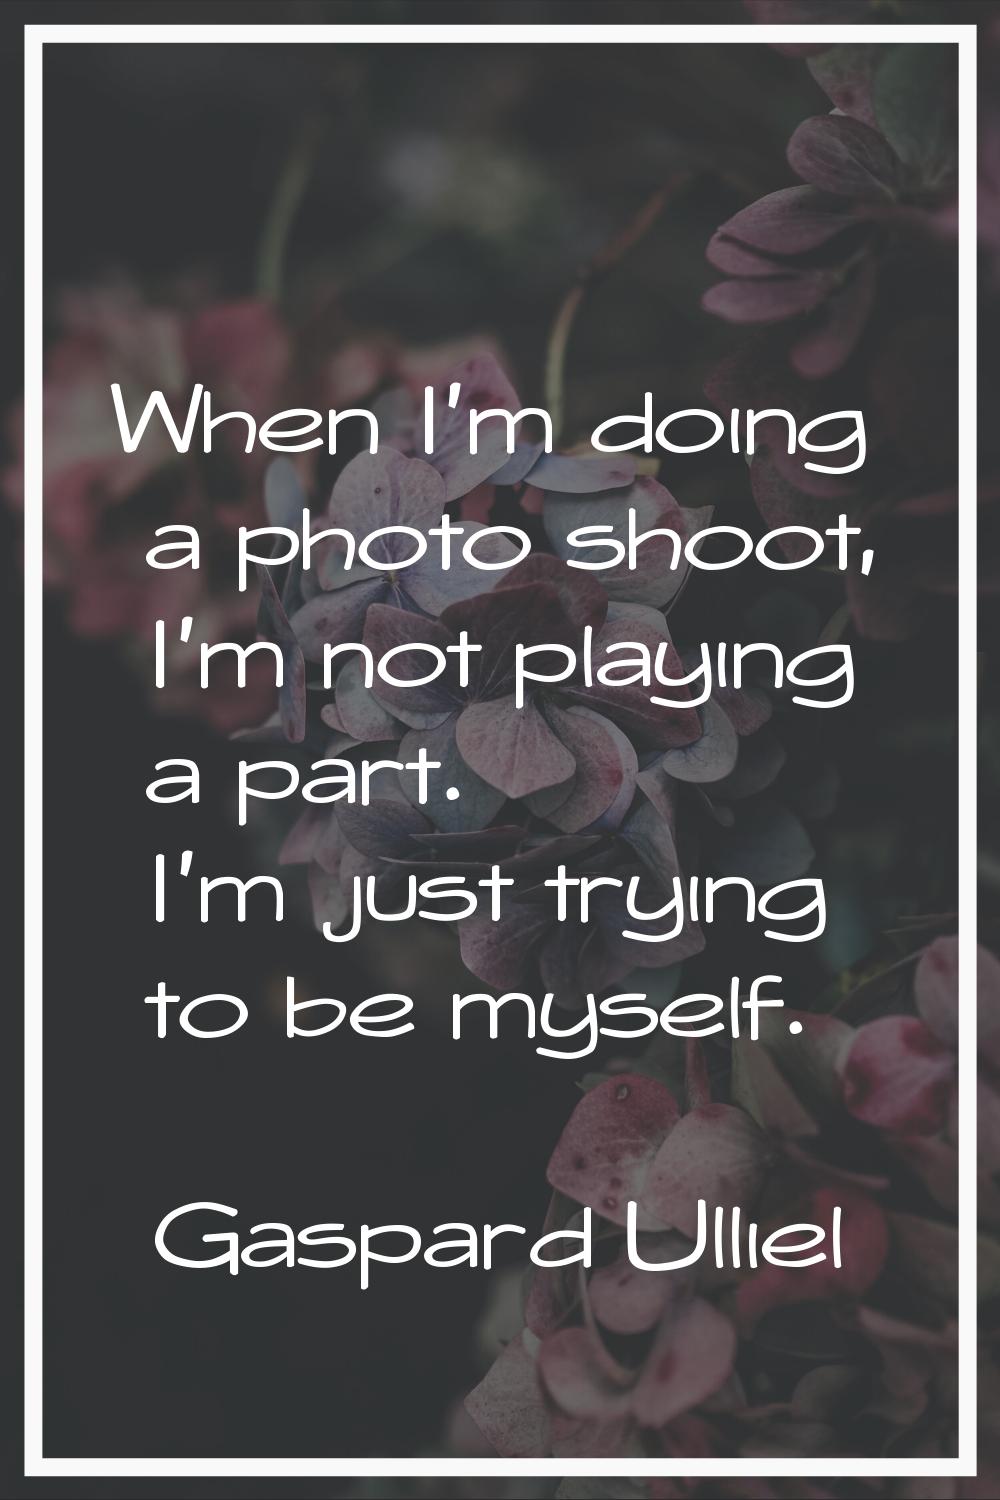 When I'm doing a photo shoot, I'm not playing a part. I'm just trying to be myself.